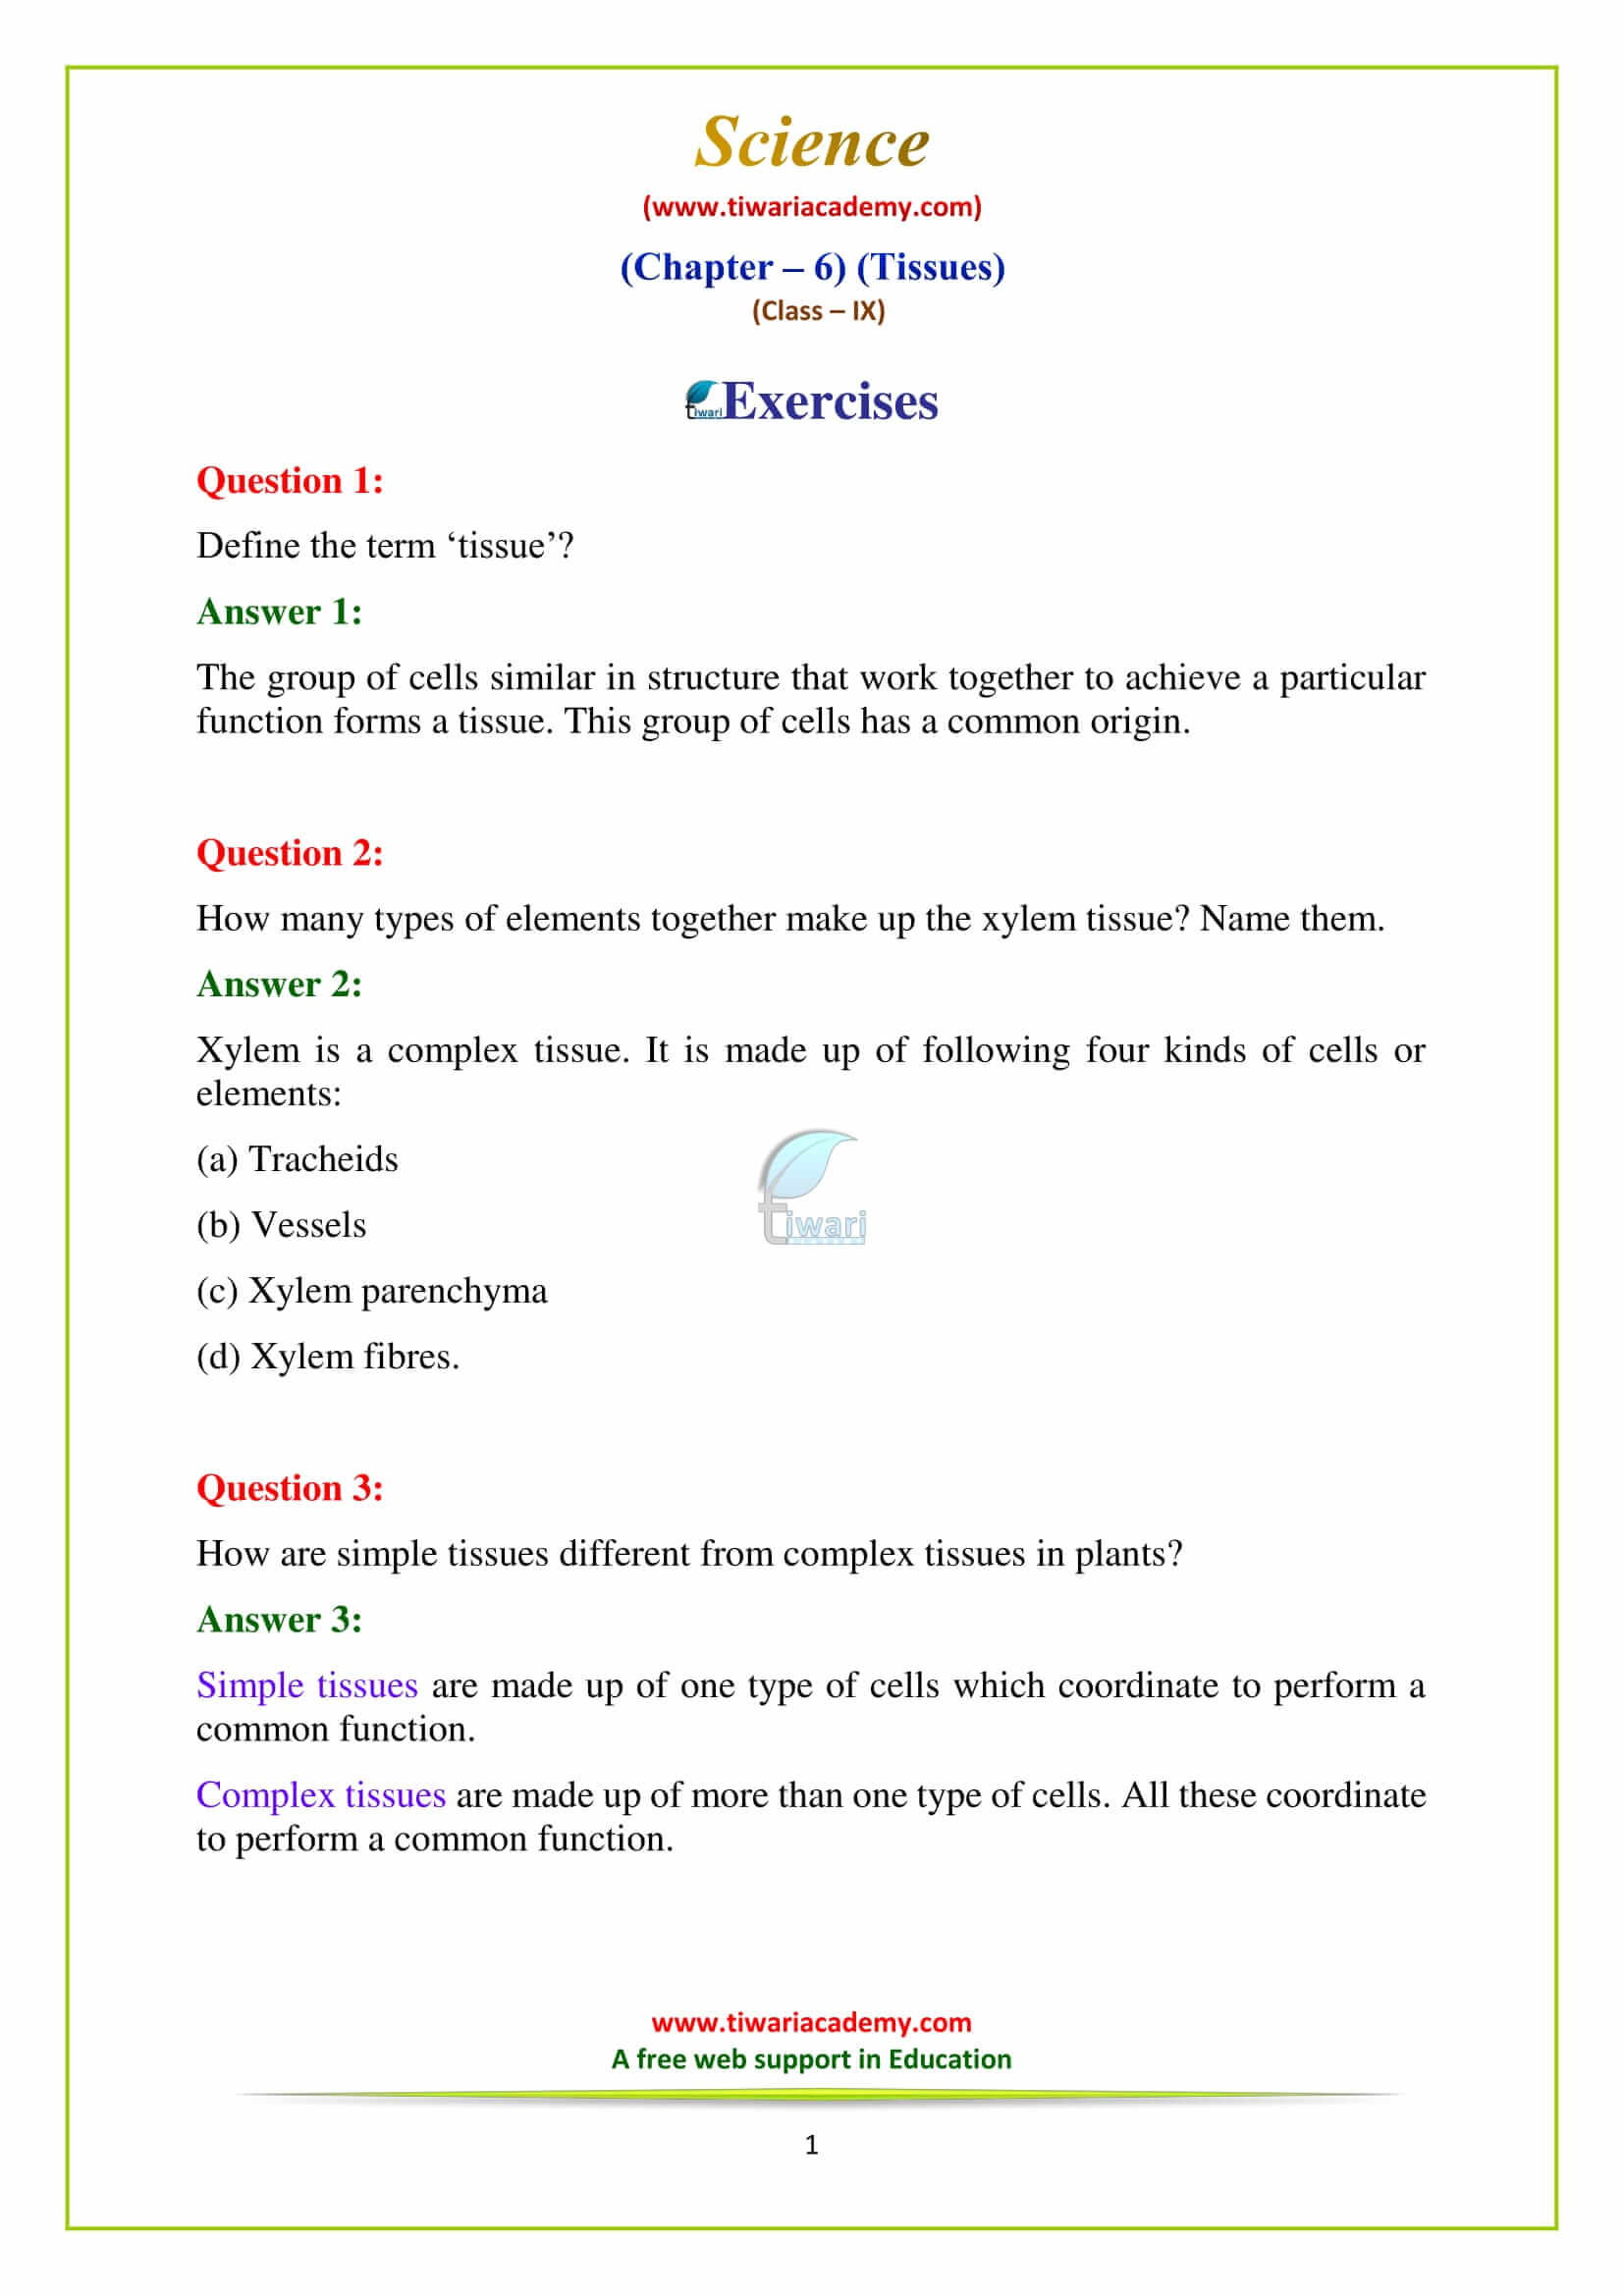 9 Science Chapter 6 Tissues Exercises questions